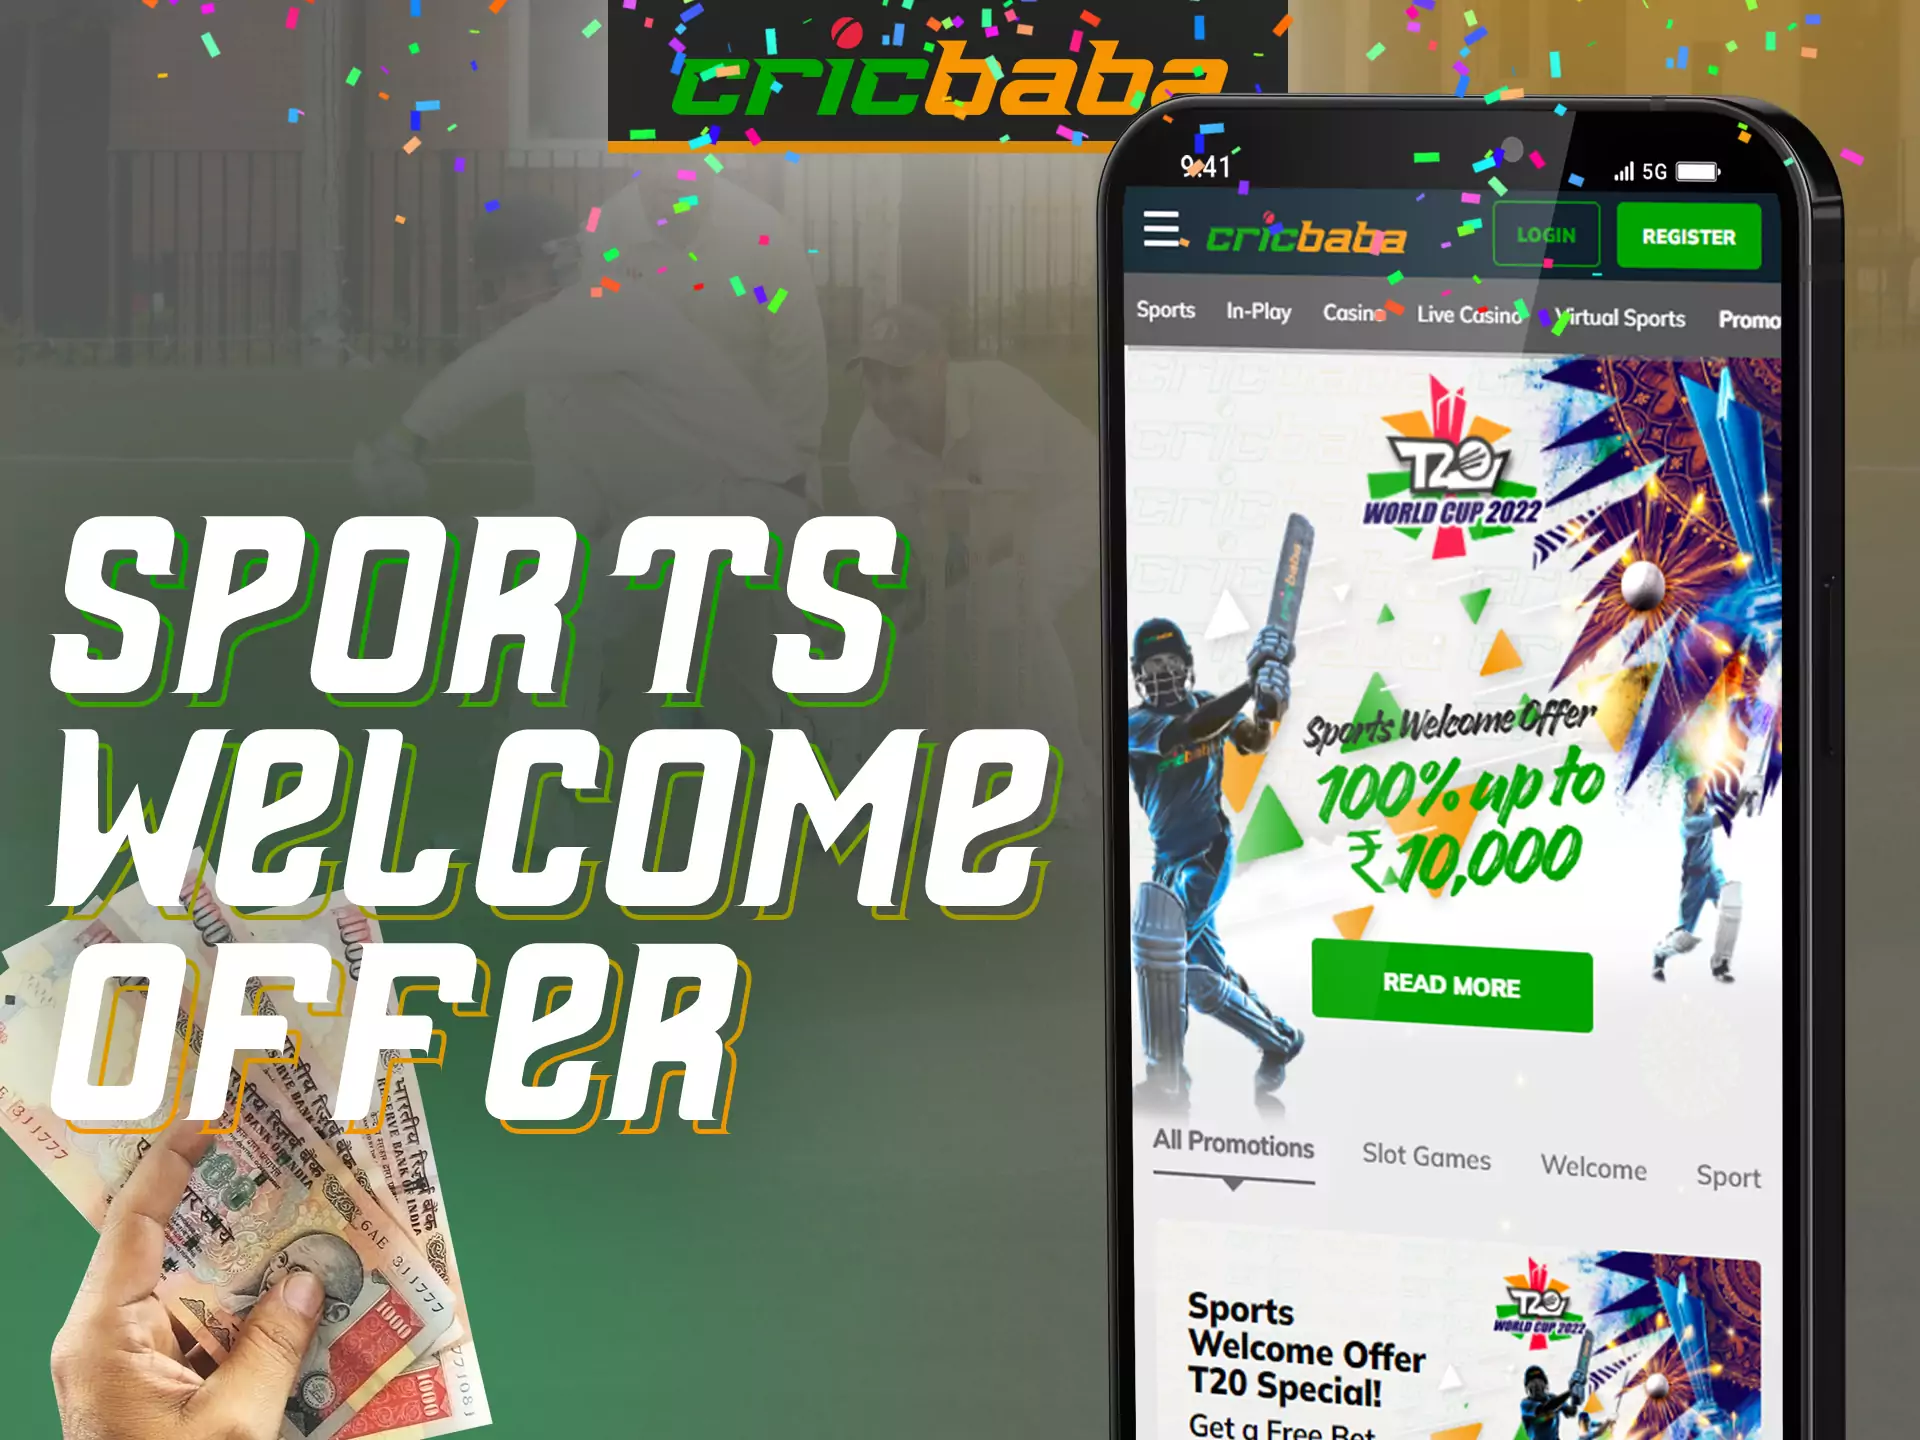 After registering on Cricbaba, you can get a special offer for sports betting.